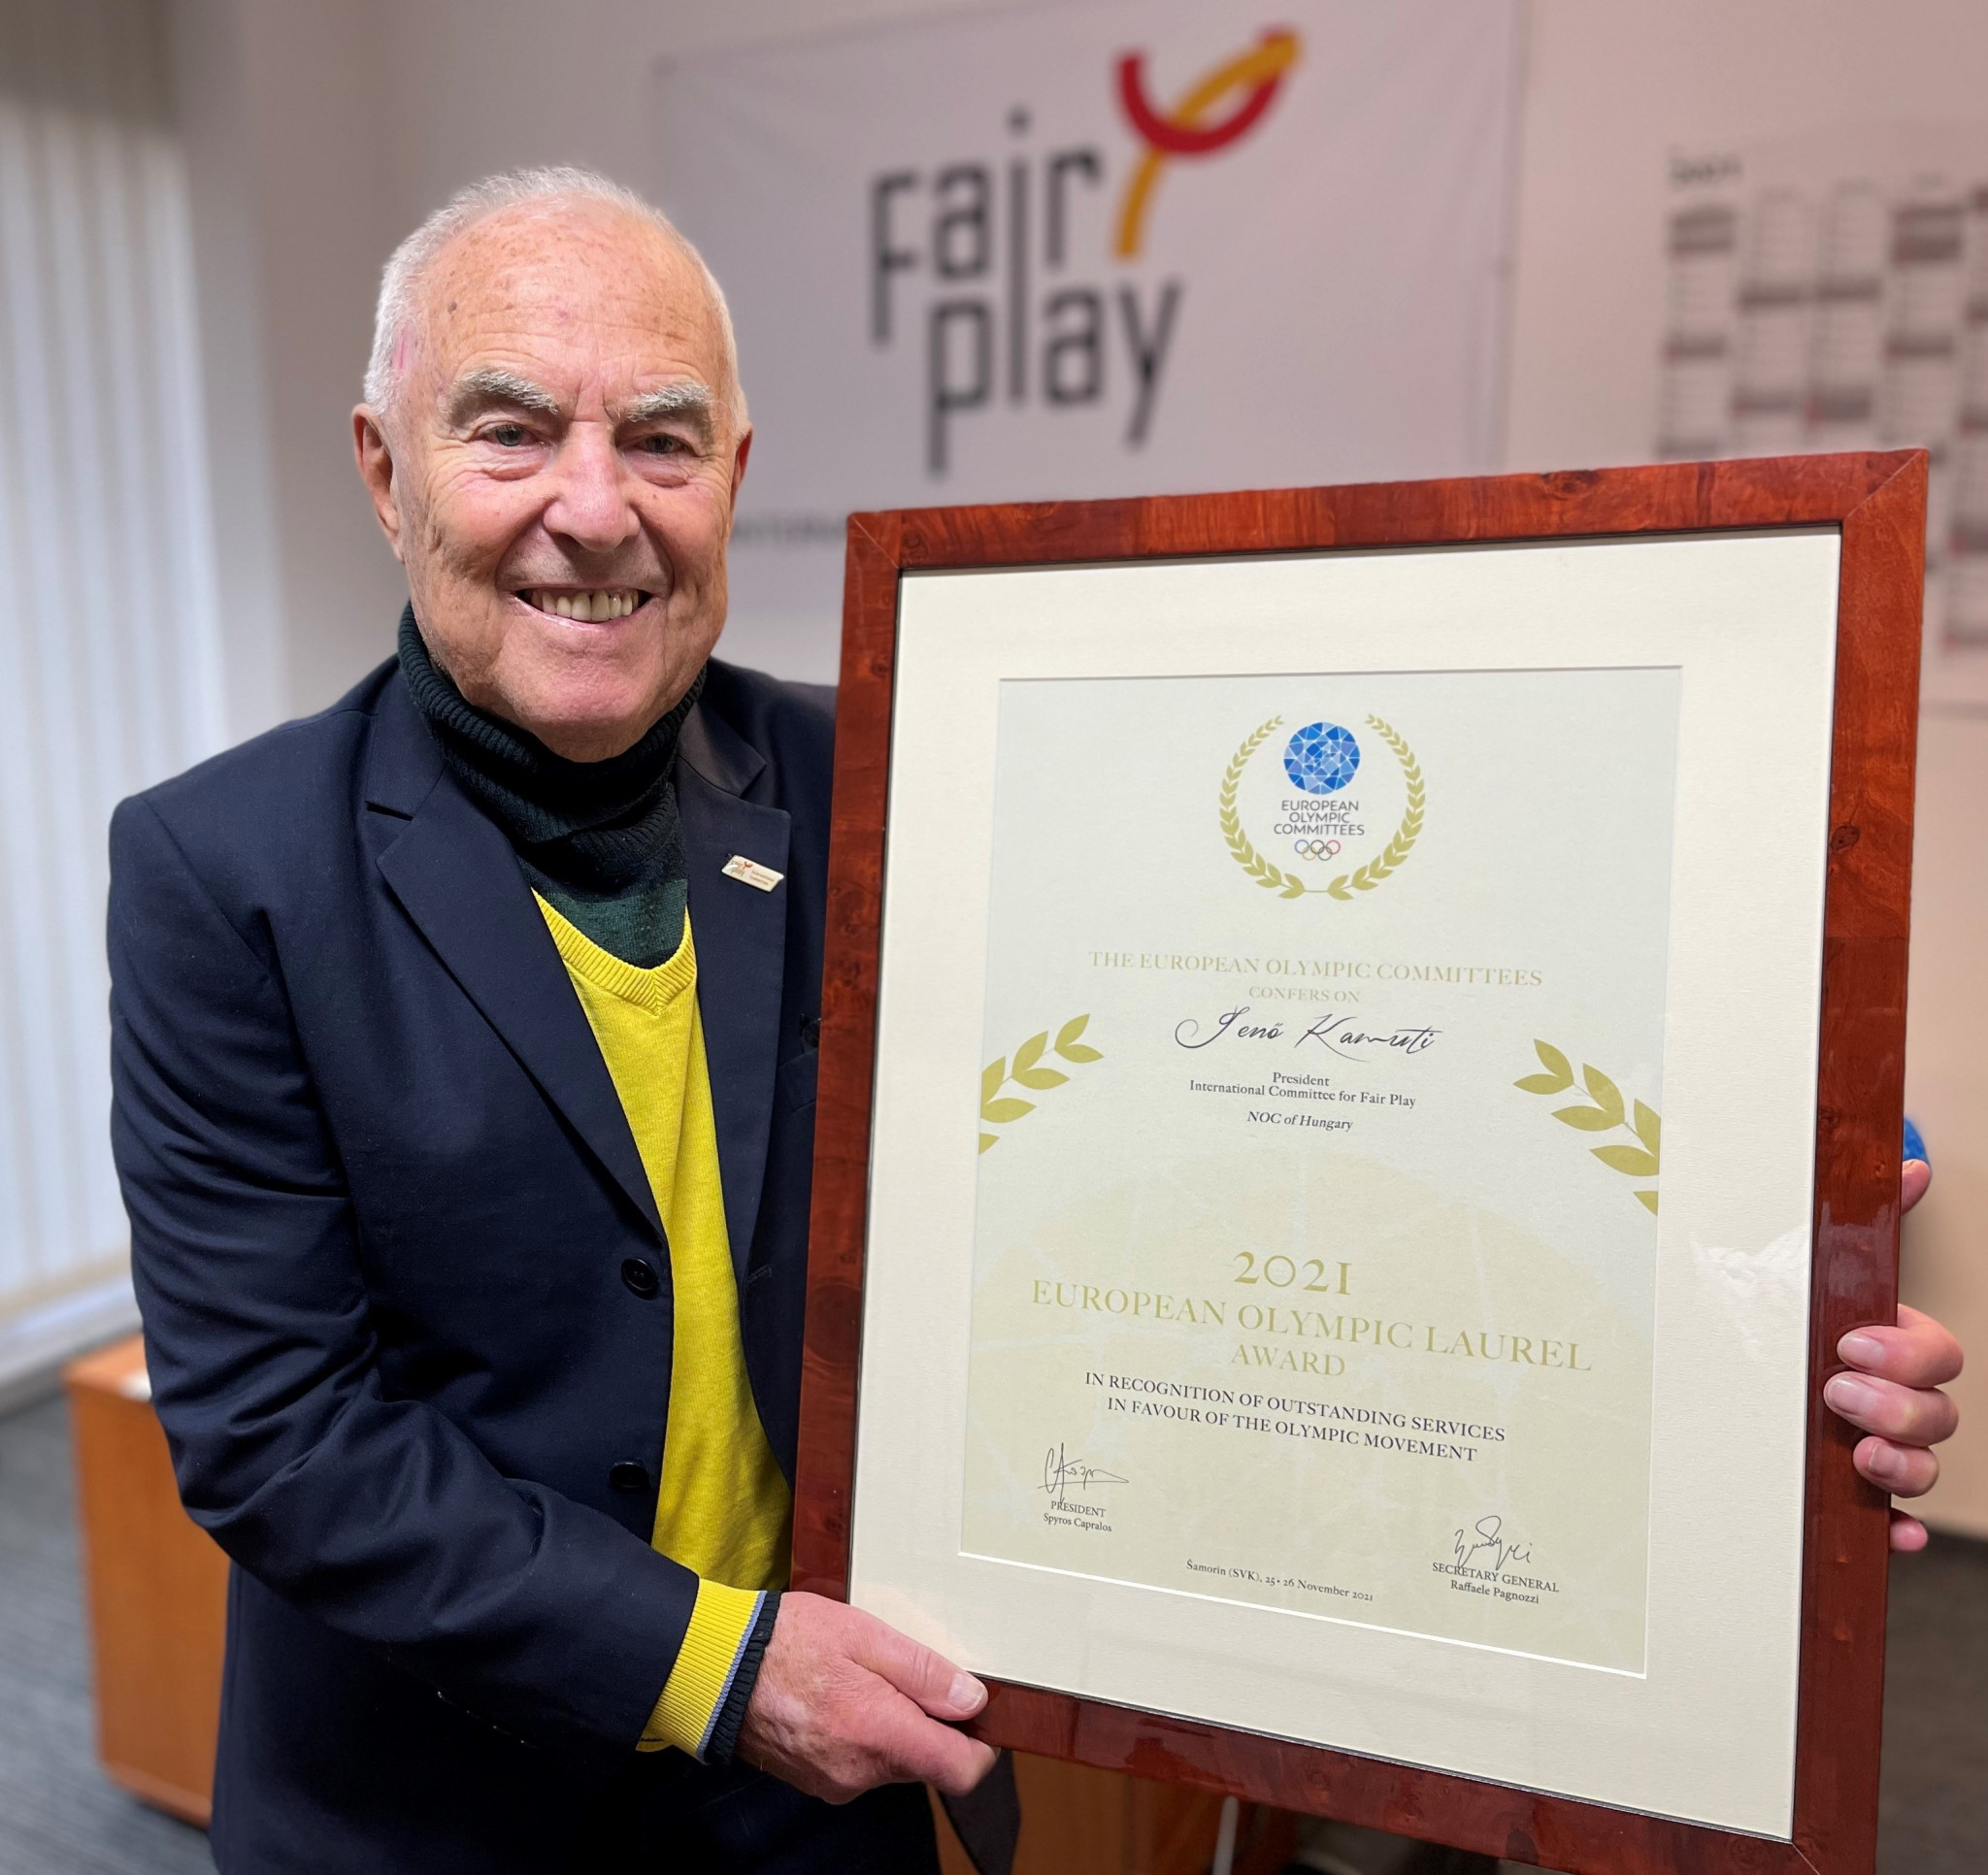 International Fair Play Committee President Jenő Kamuti is set to present the awards ©CIFP